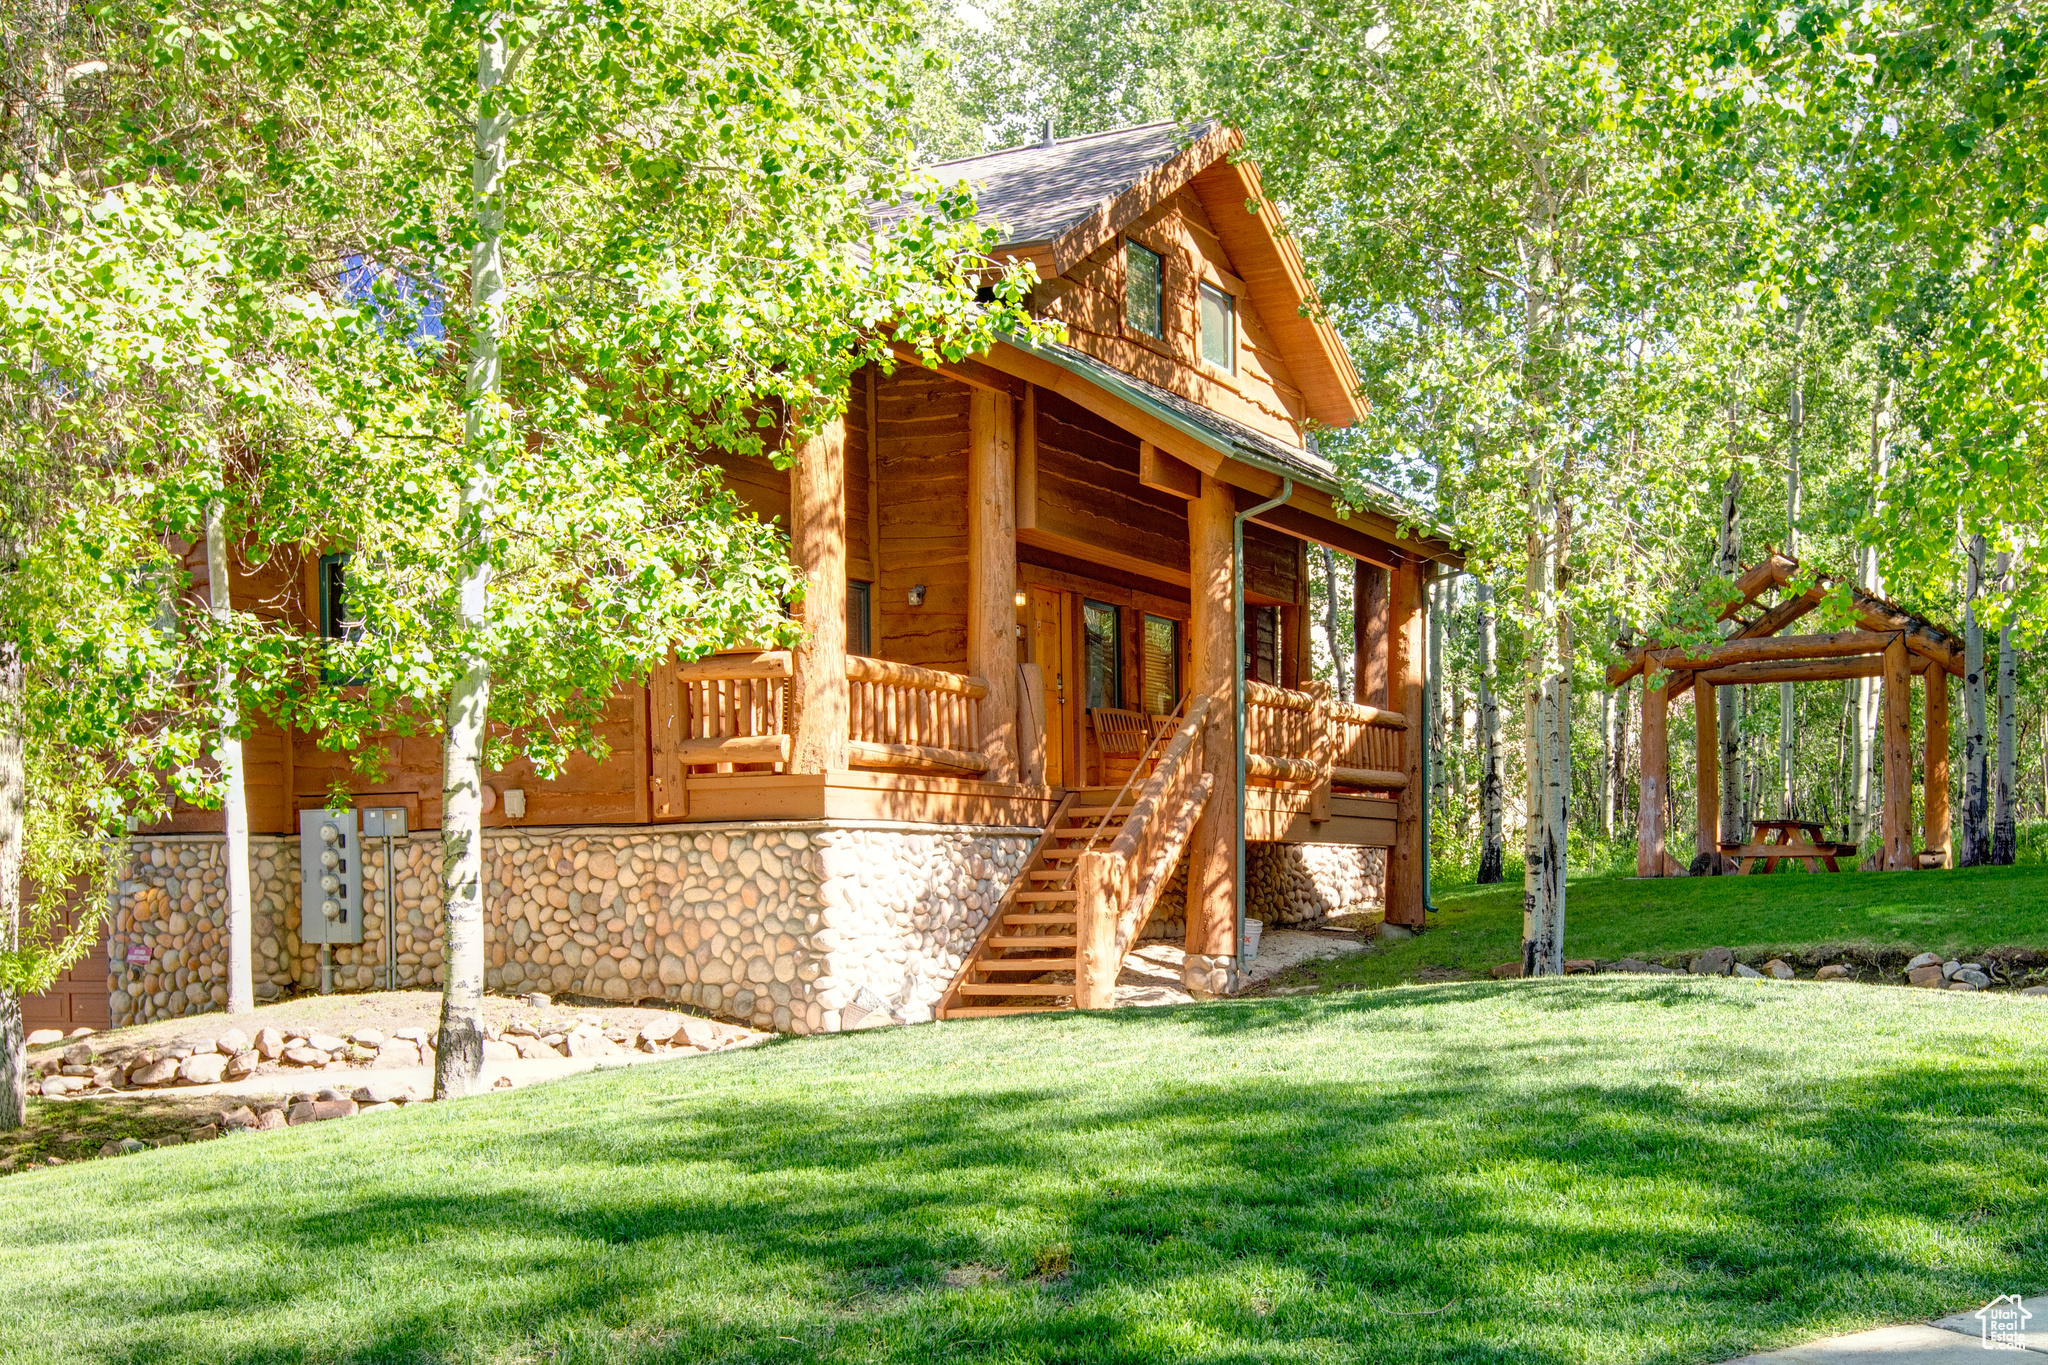 Welcome to Timberwolf!  A small enclave nestled in the trees near Canyons Ski Resort.